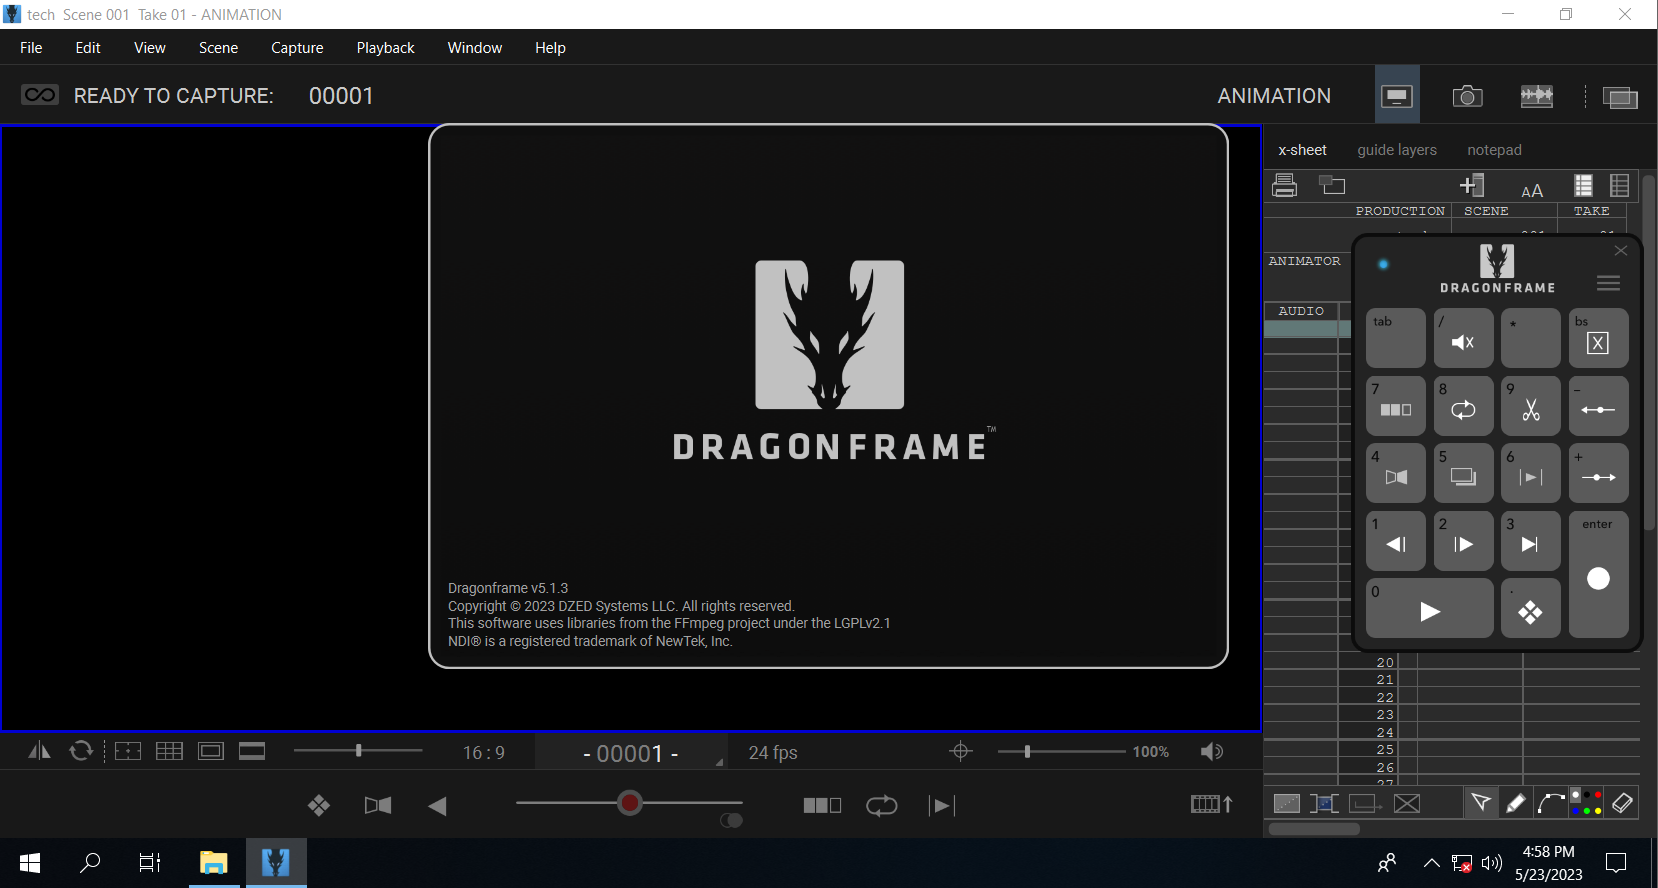 Working with Dragonframe 5.1.3 full license